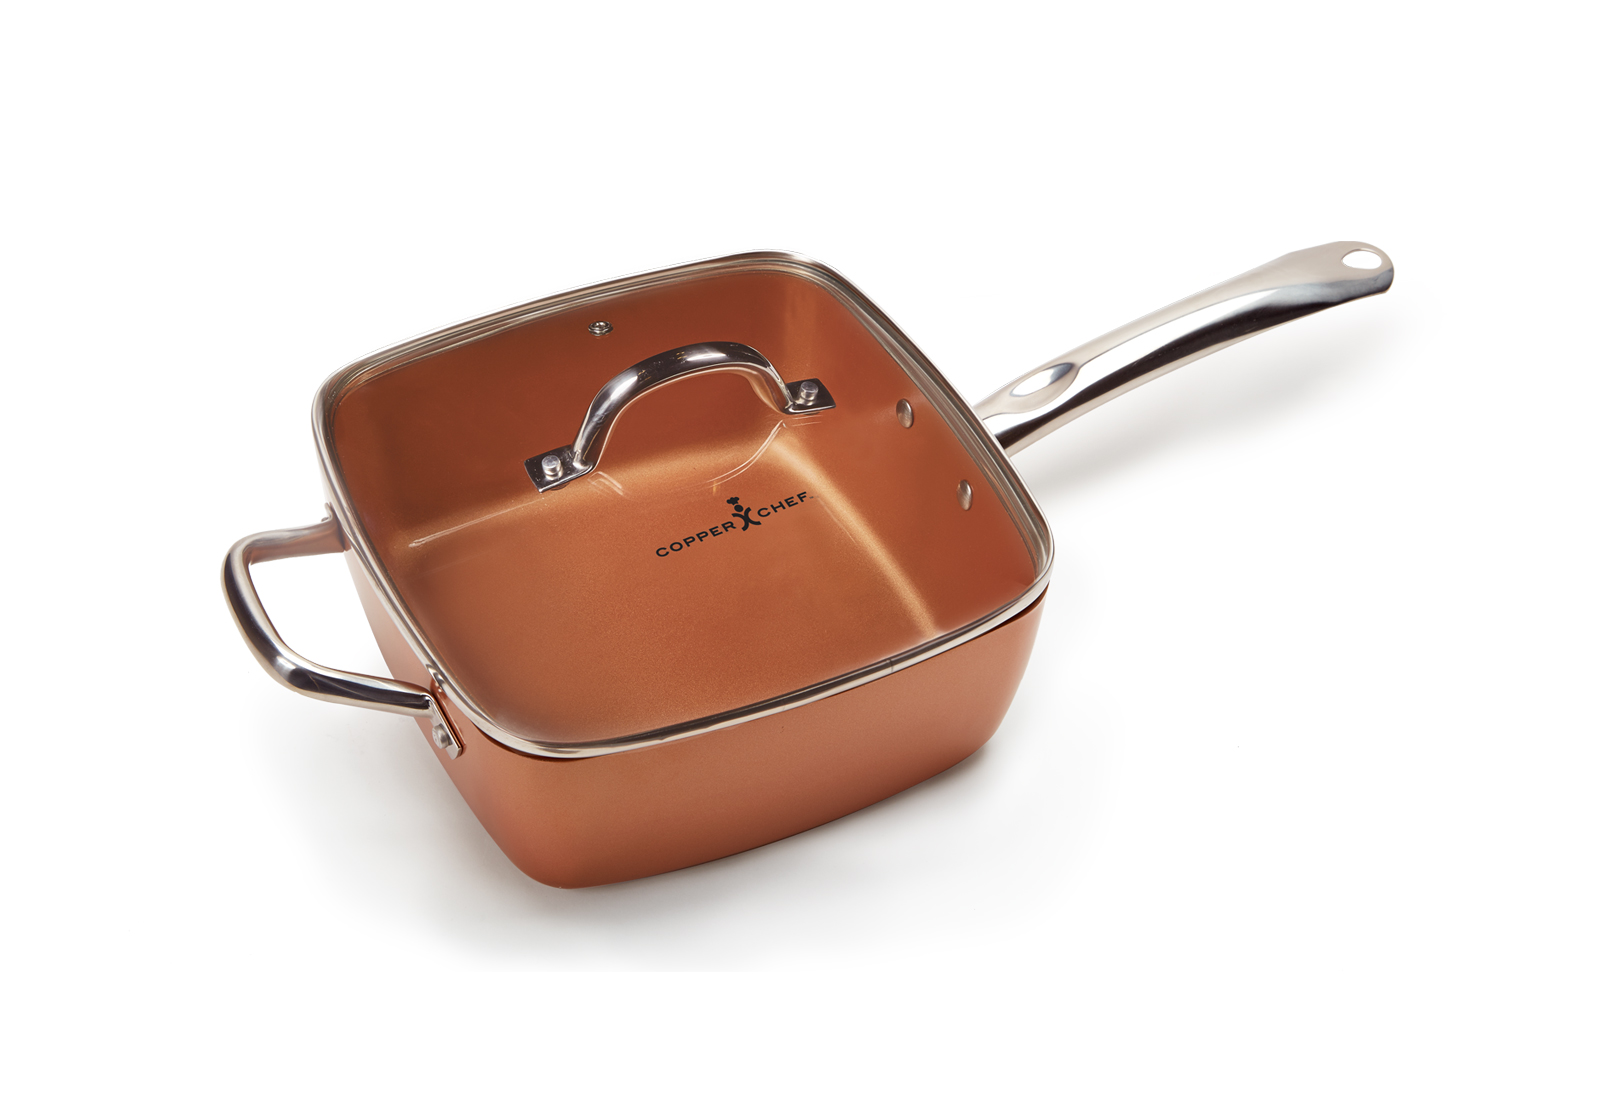 Copper Chef Deep Dish Pan Product Image